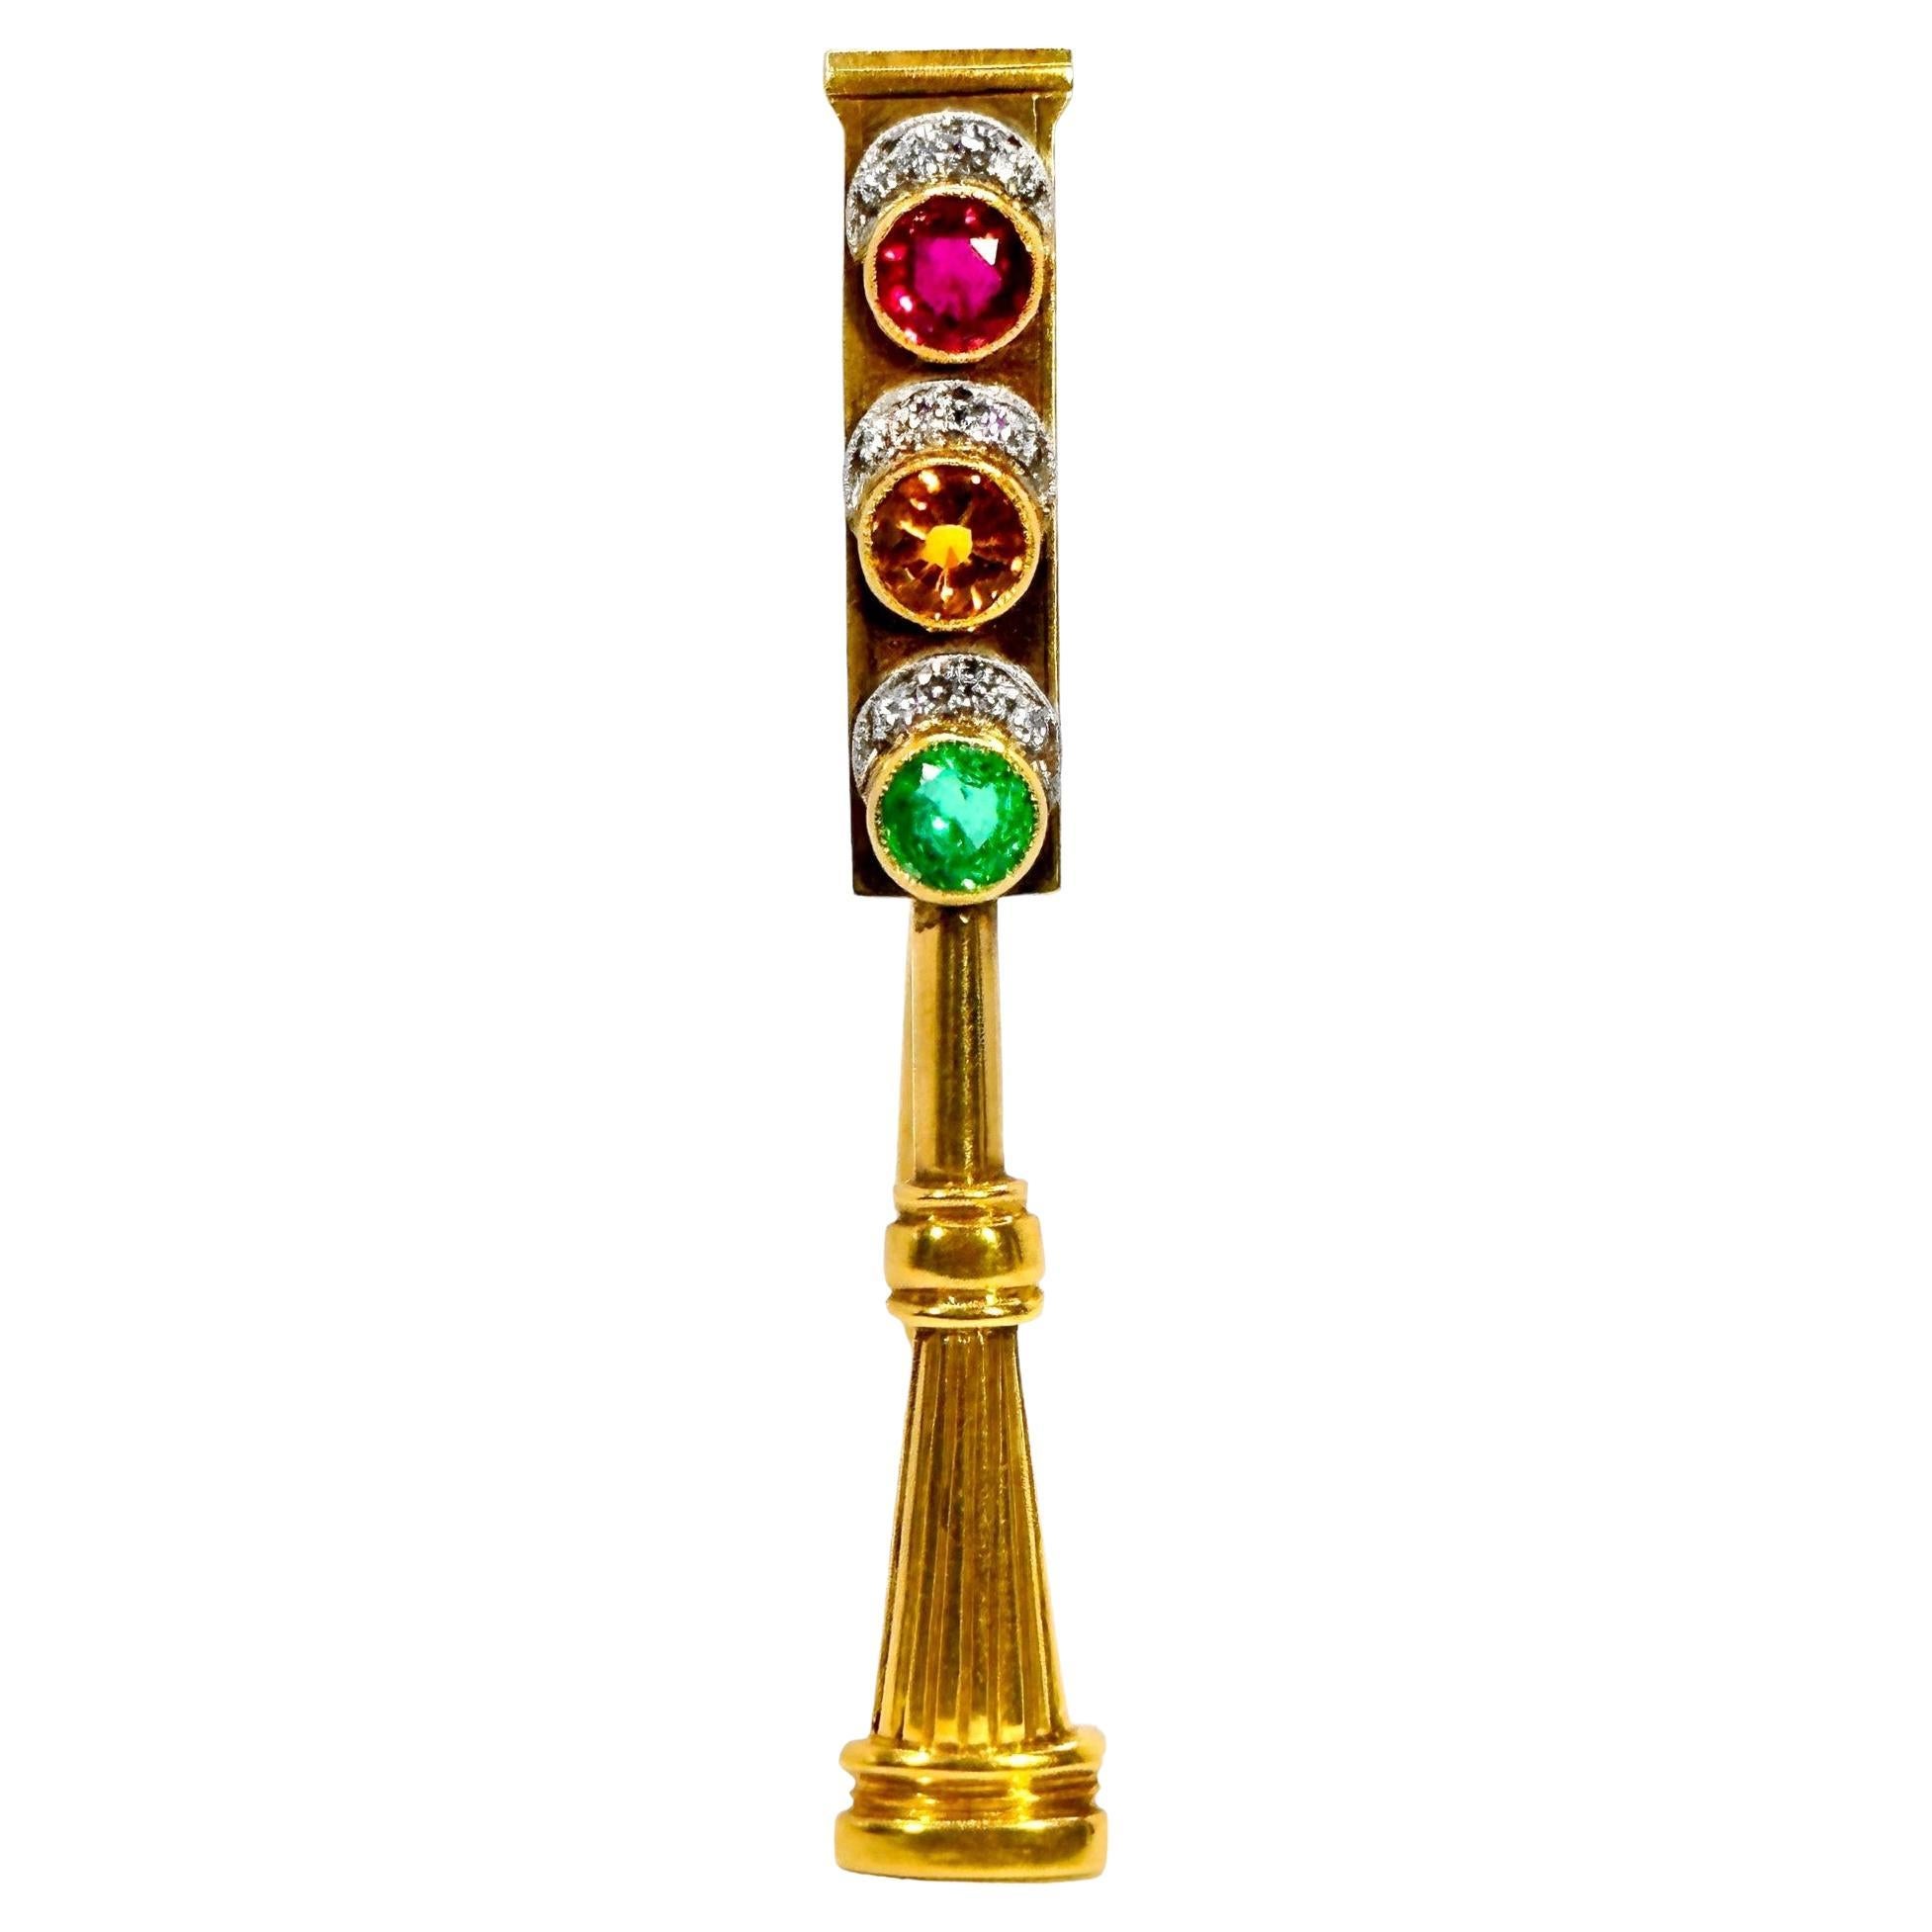 This wonderful early 20th century British 18 karat yellow gold pole mounted traffic control light brooch is a nostalgic visual delight. Three bright round gems, a ruby, emerald and golden citrine are control indicators. Each has a hood of brilliant